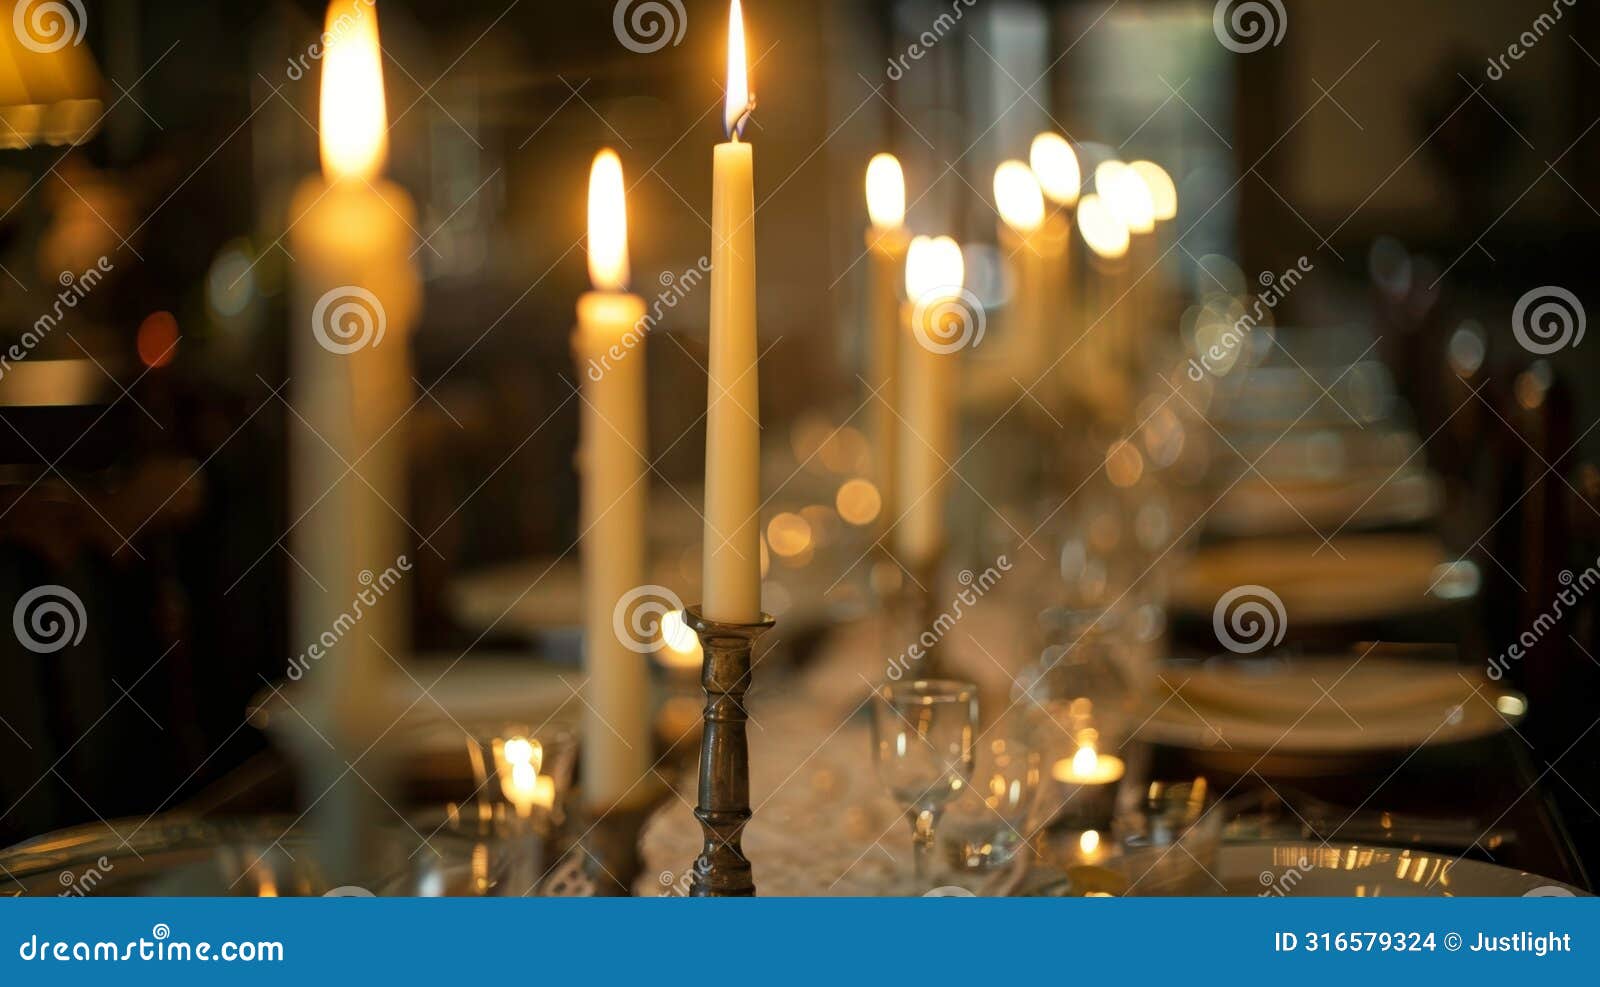 a long narrow dining table is lined with a row of elegant taper candles as the centerpiece creating a dramatic and